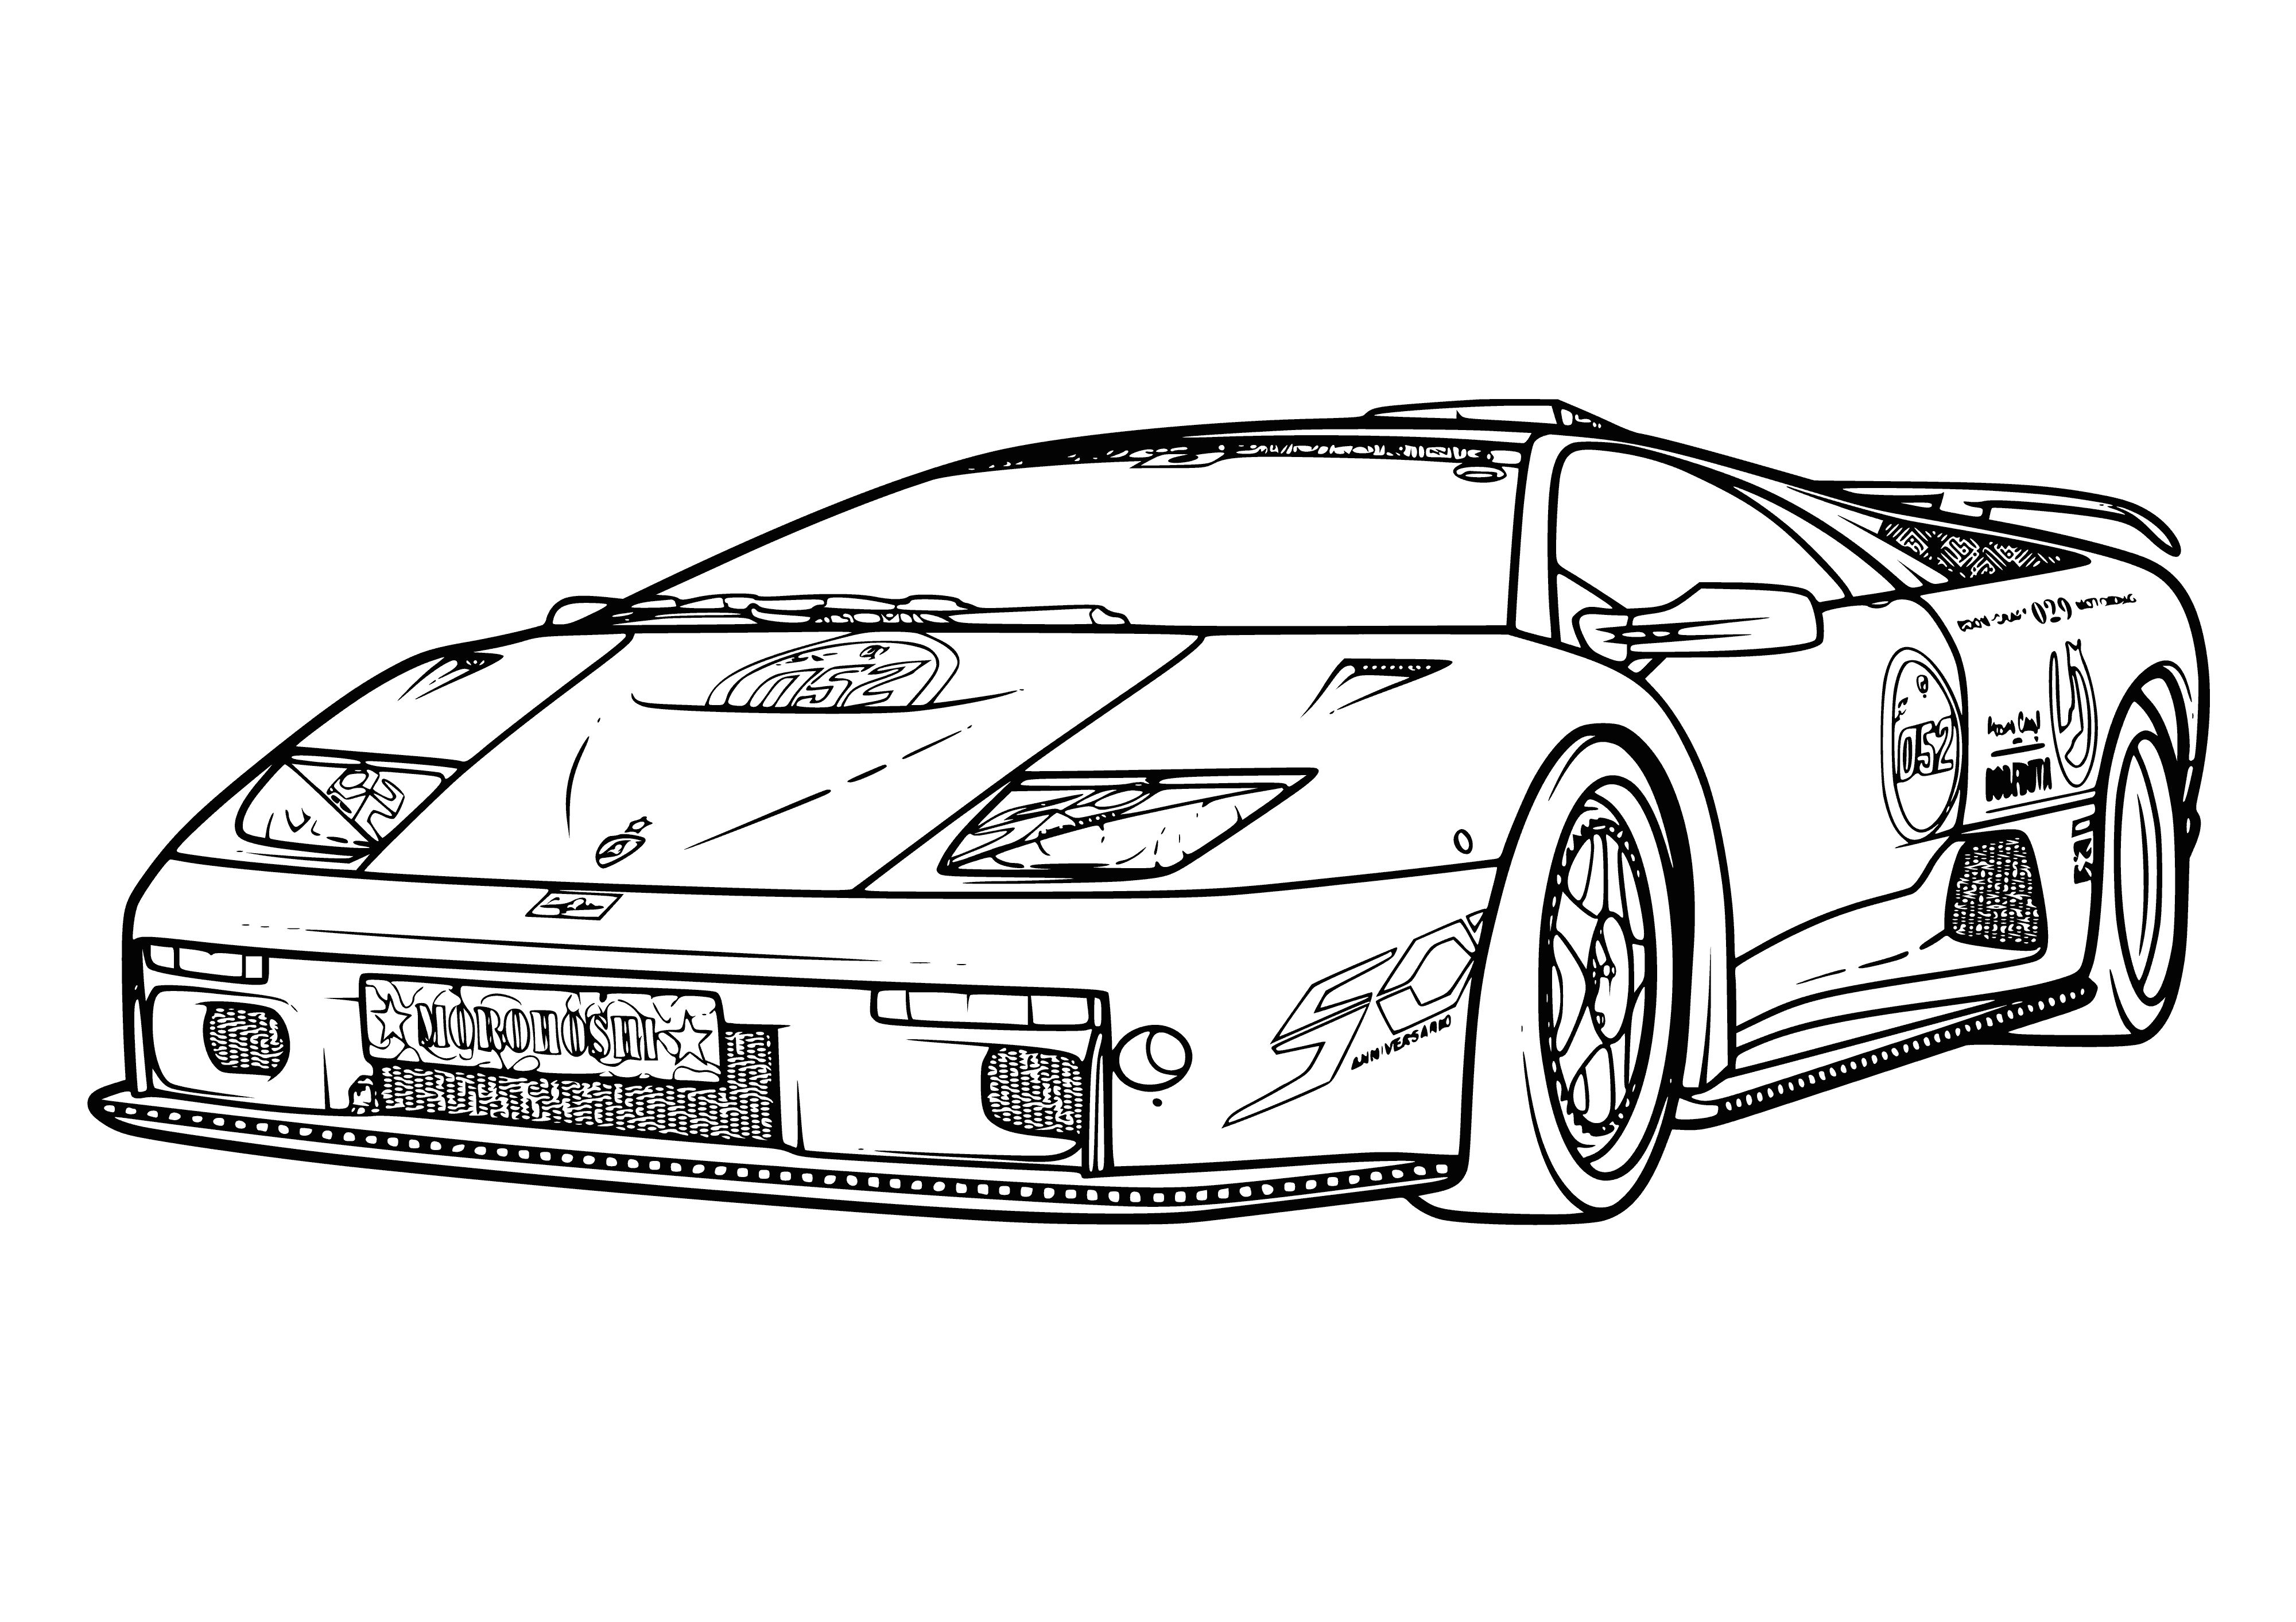 coloring page: Race car: Long pointed hood & wide body, 4 skinny tires (red or blue). Low to ground & rear spoiler for speed.